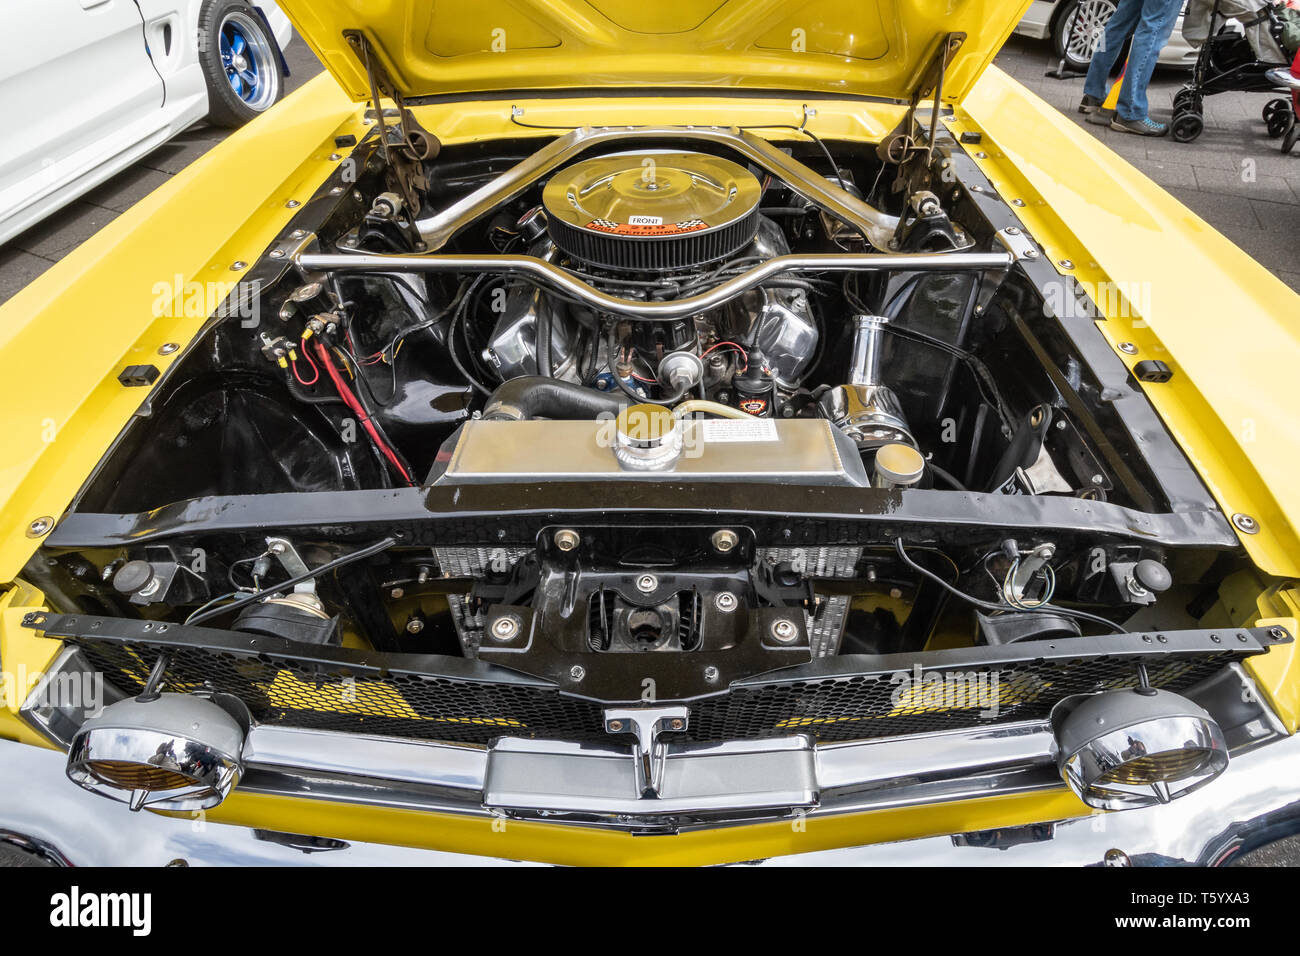 Close-up of the engine of a yellow 1965 Ford Mustang 4700cc car at a classic motor vehicle show in the UK. American automobile with hood open. Stock Photo